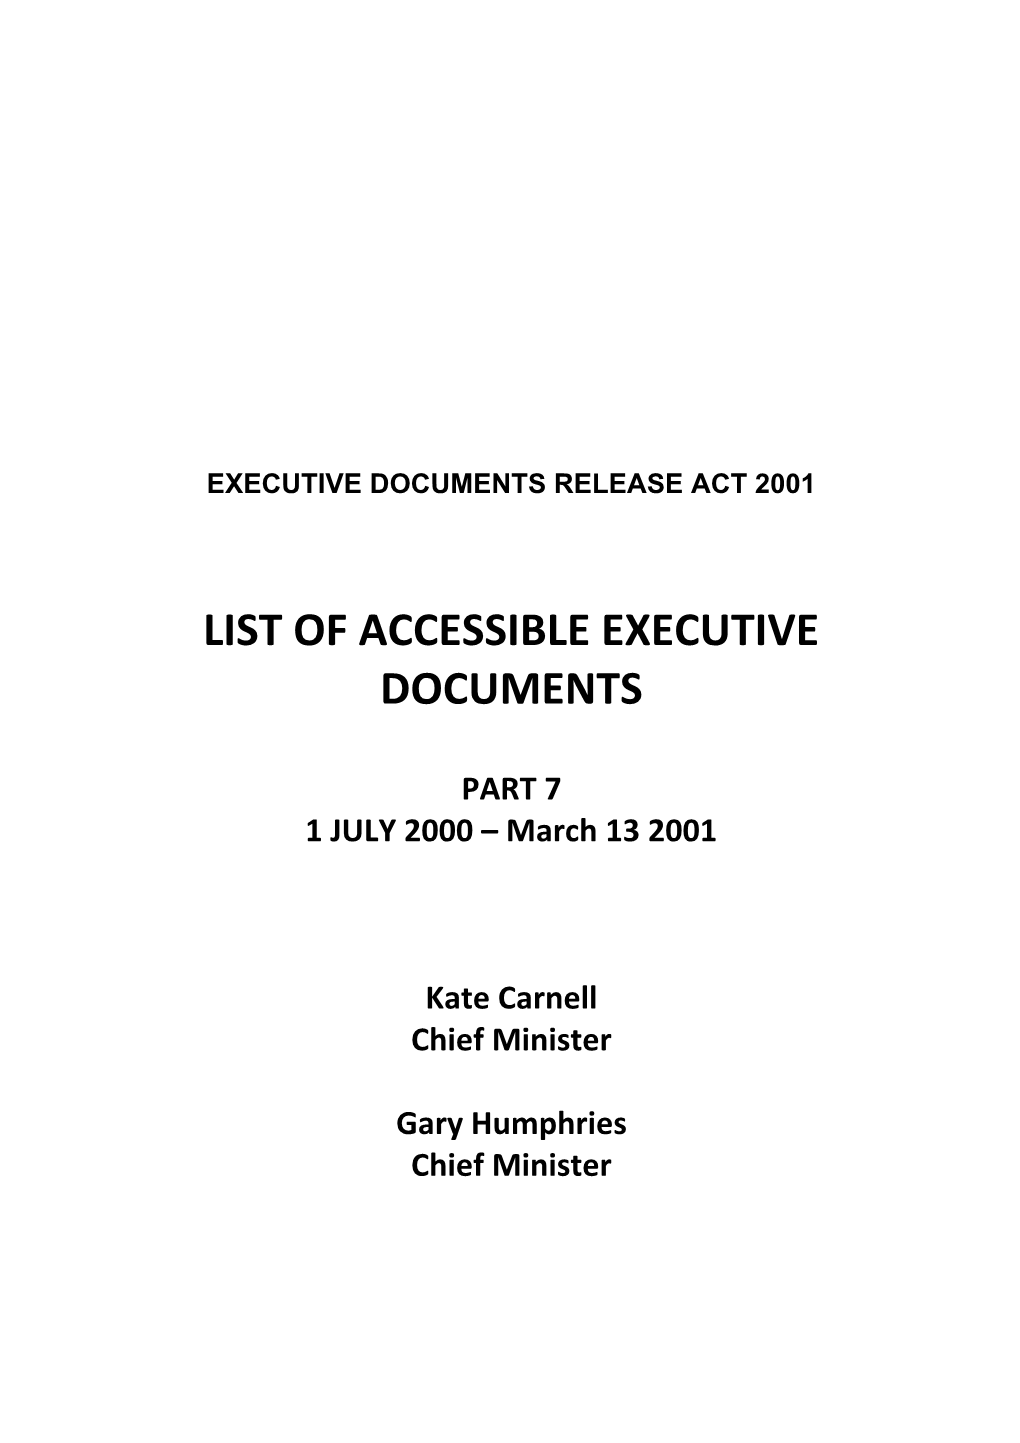 List of Accessible Executive Documents Part 7 1 July 2000 - March 31 2001